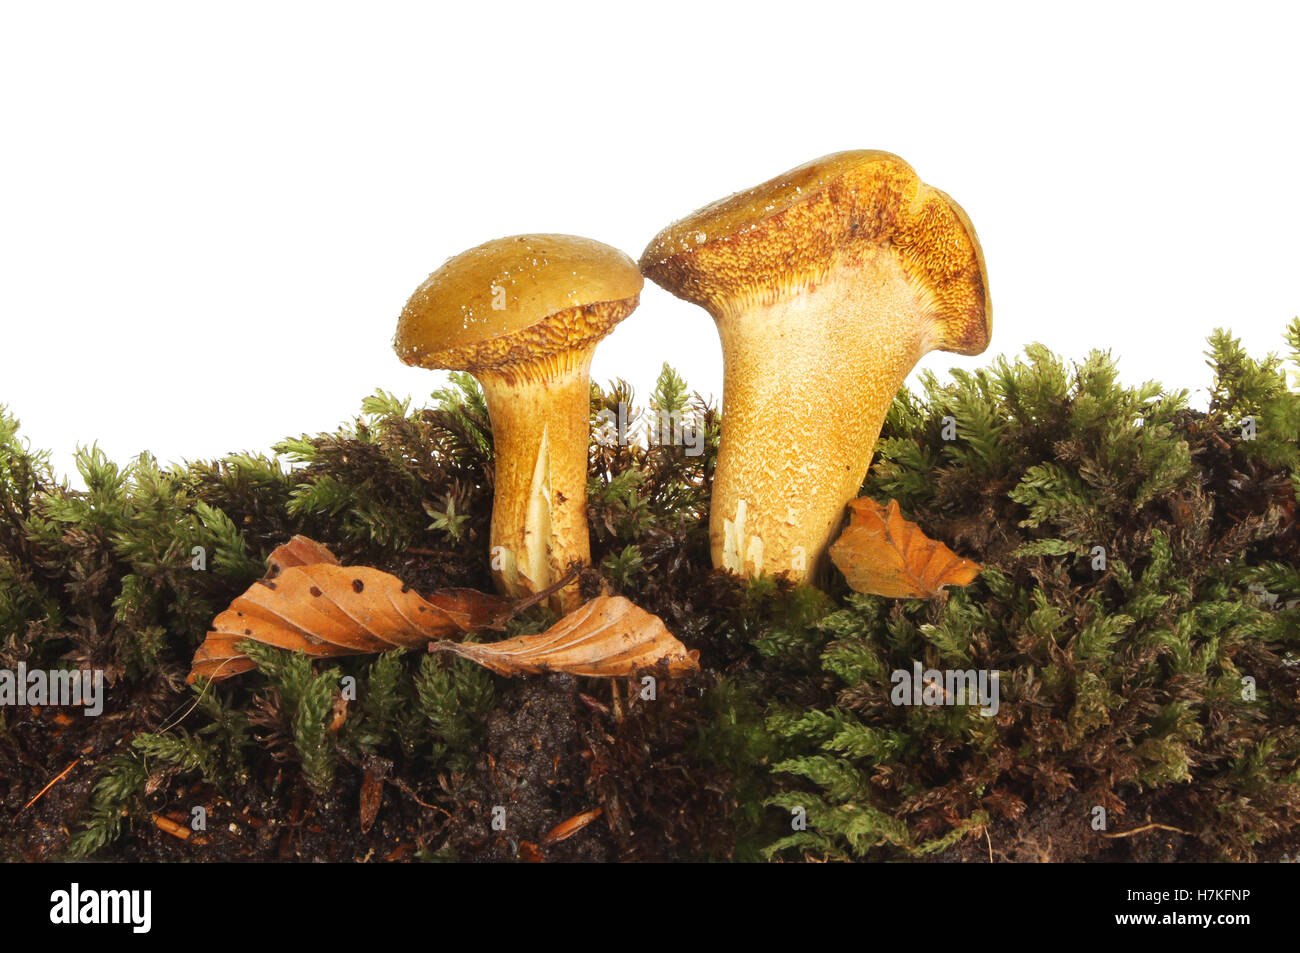 Fungi growing in moss against a white background Stock Photo